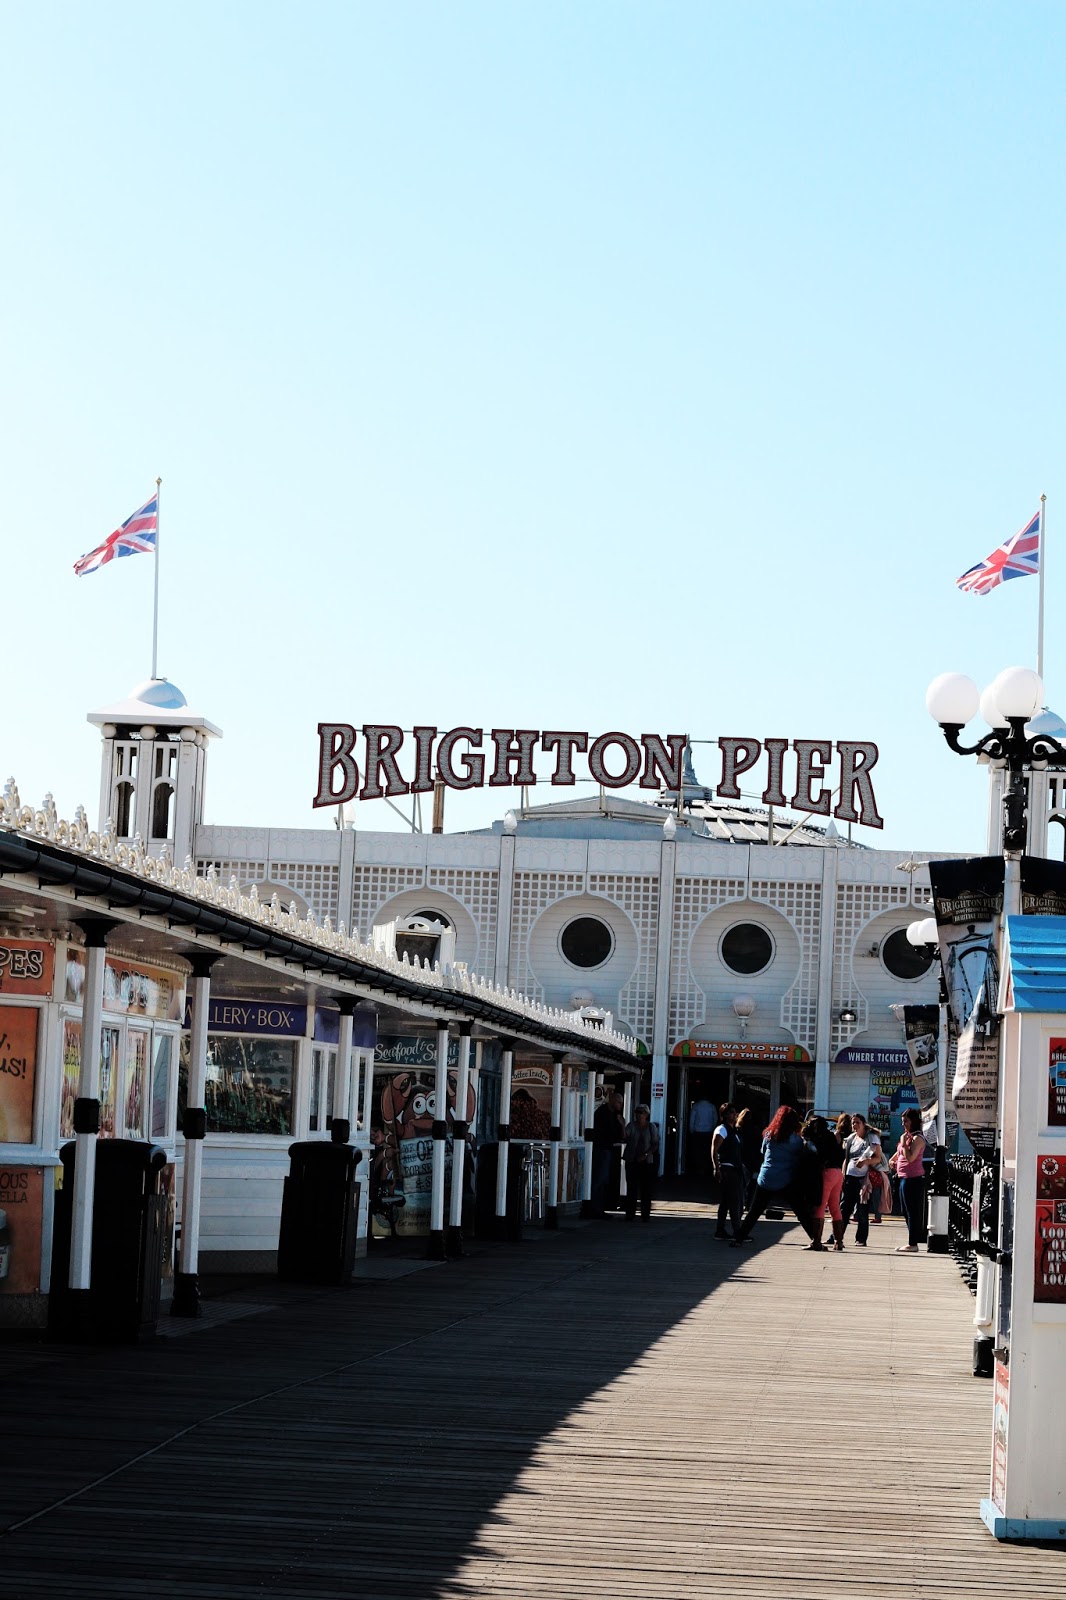 planning a day trip to brighton? click through for a list of things to do and see in the seaside city